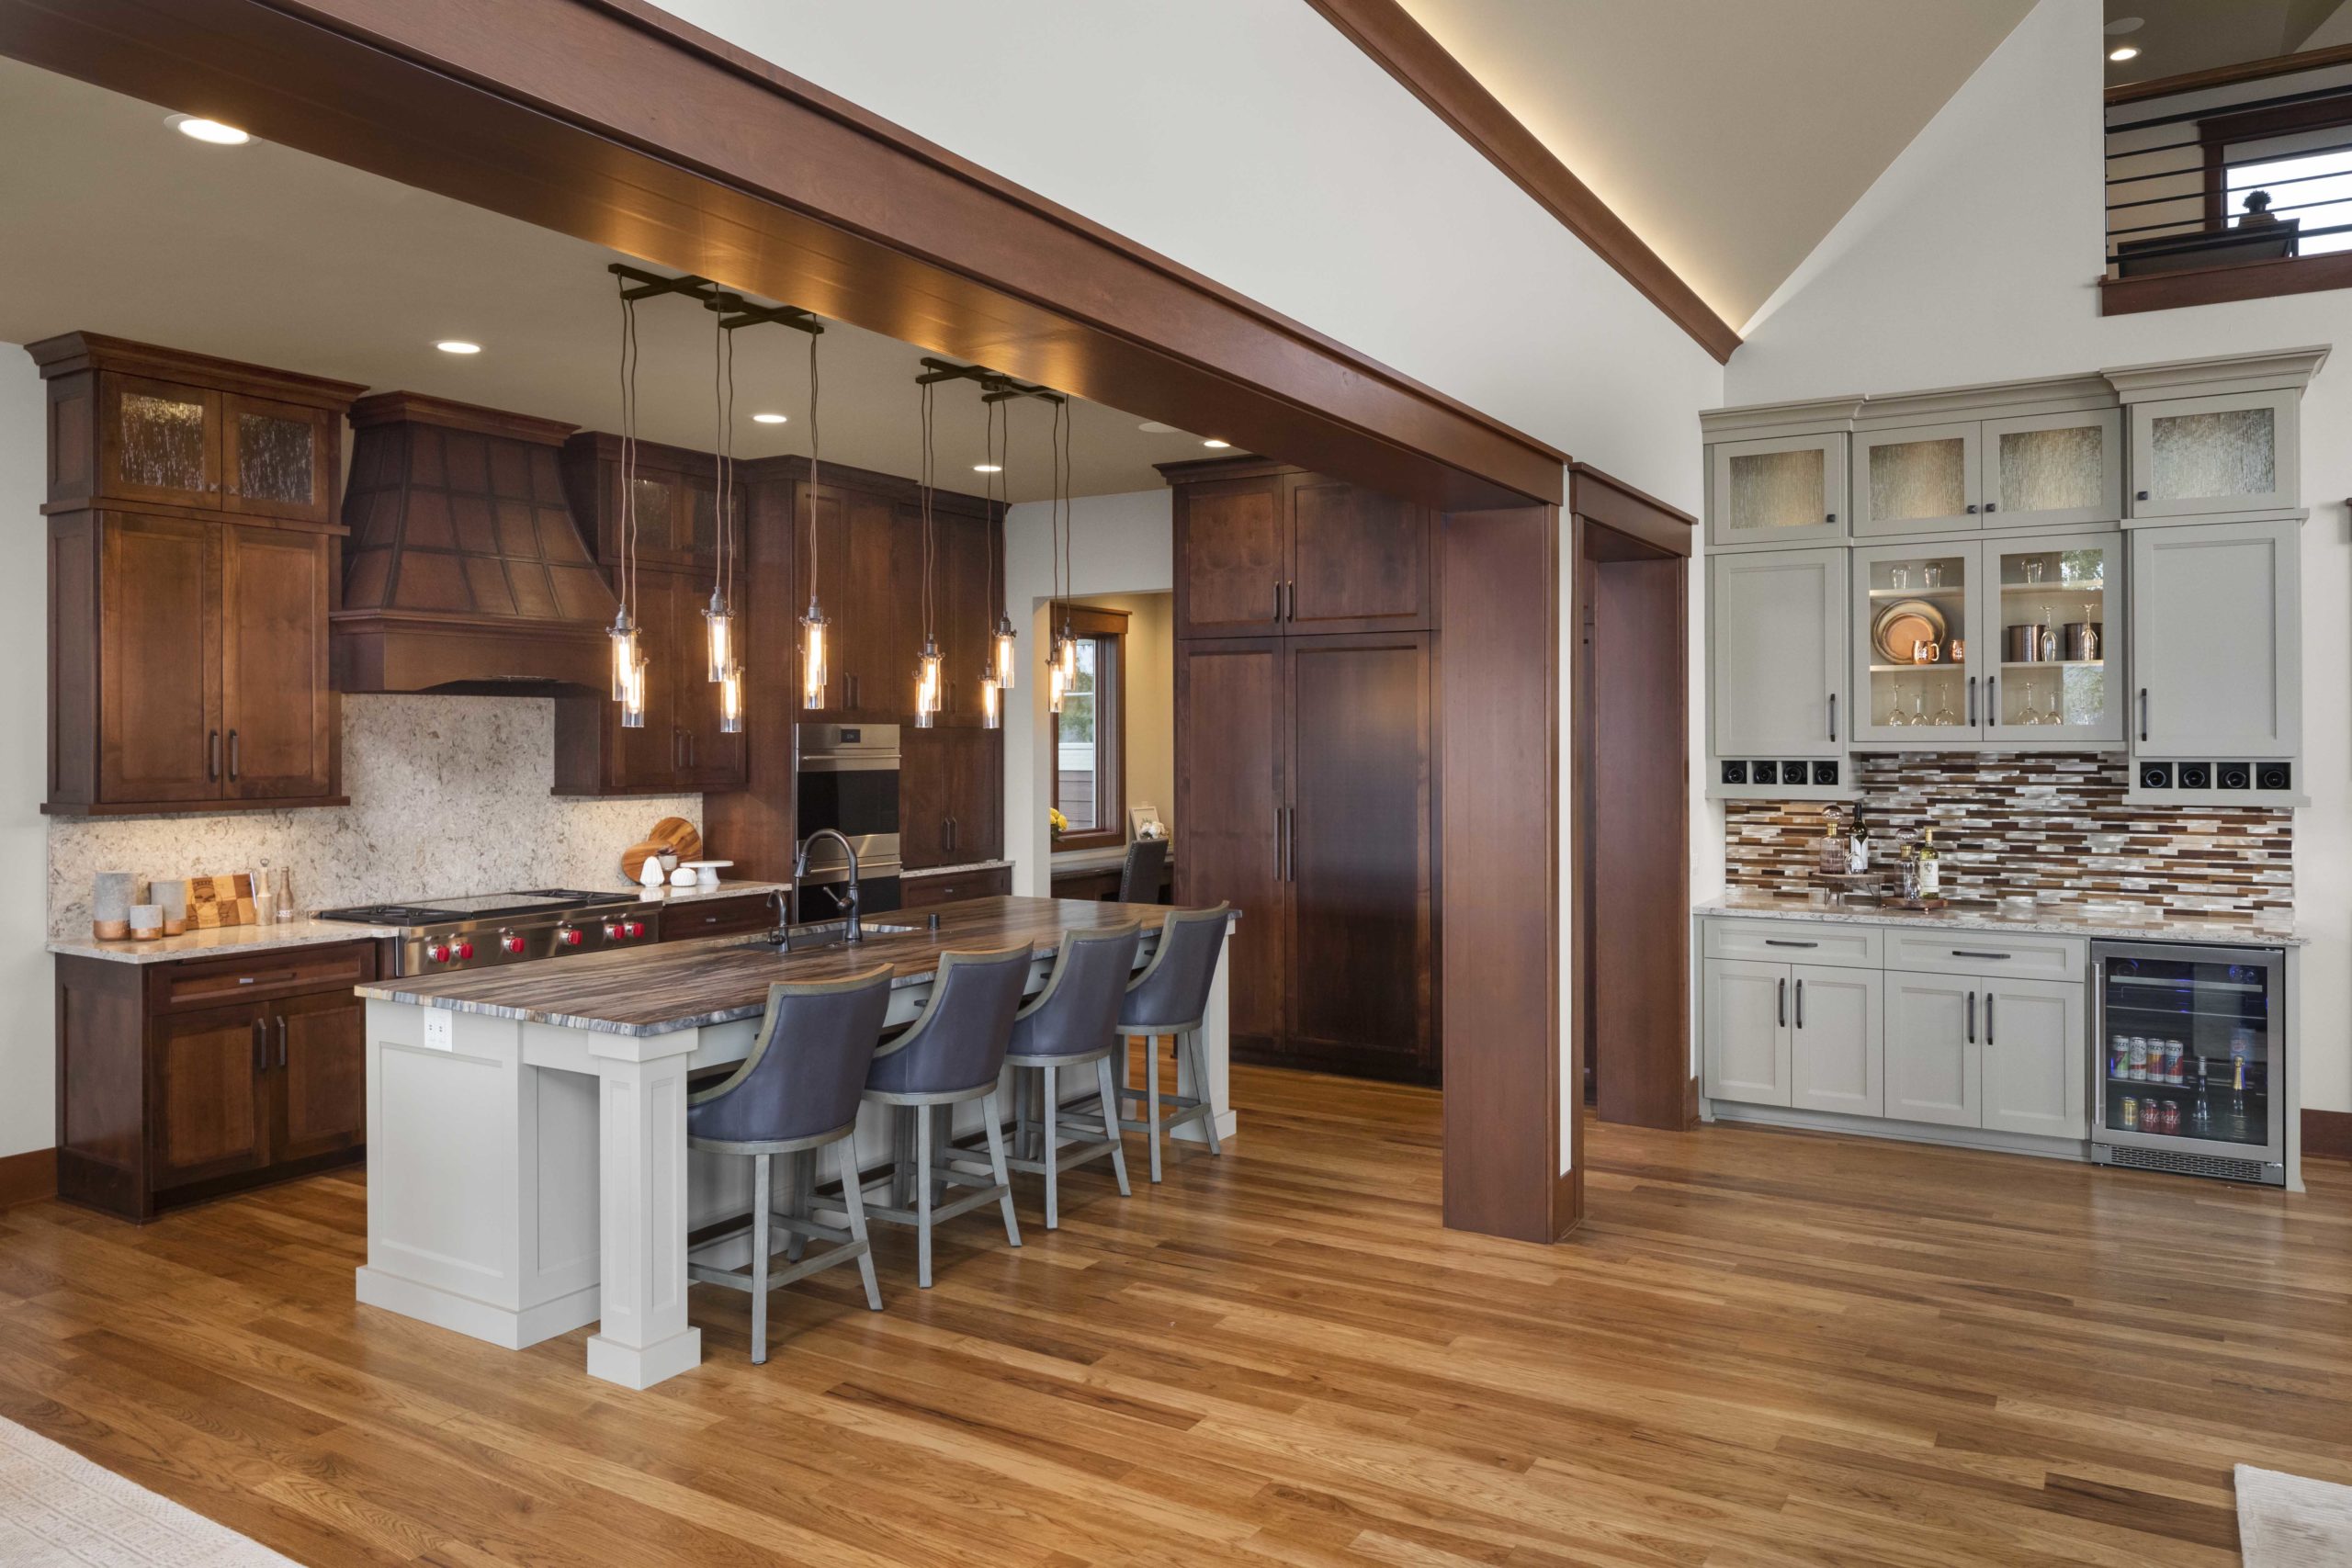 A custom home remodel featuring a large kitchen with wood floors and a center island.